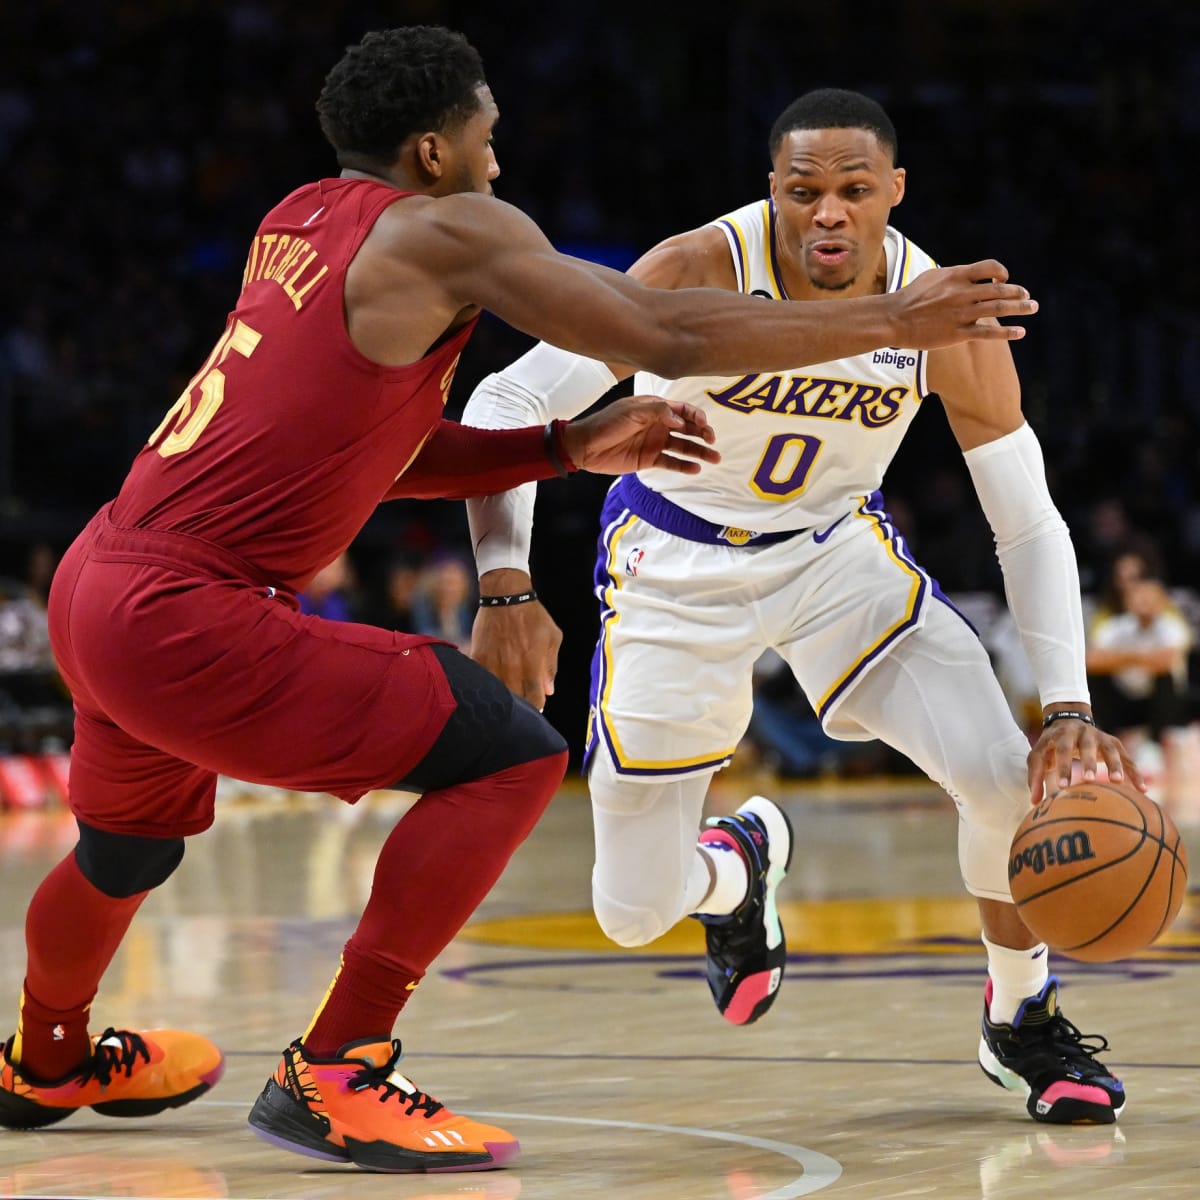 Lakers vs. Cavaliers: Start time, where to watch, what's the